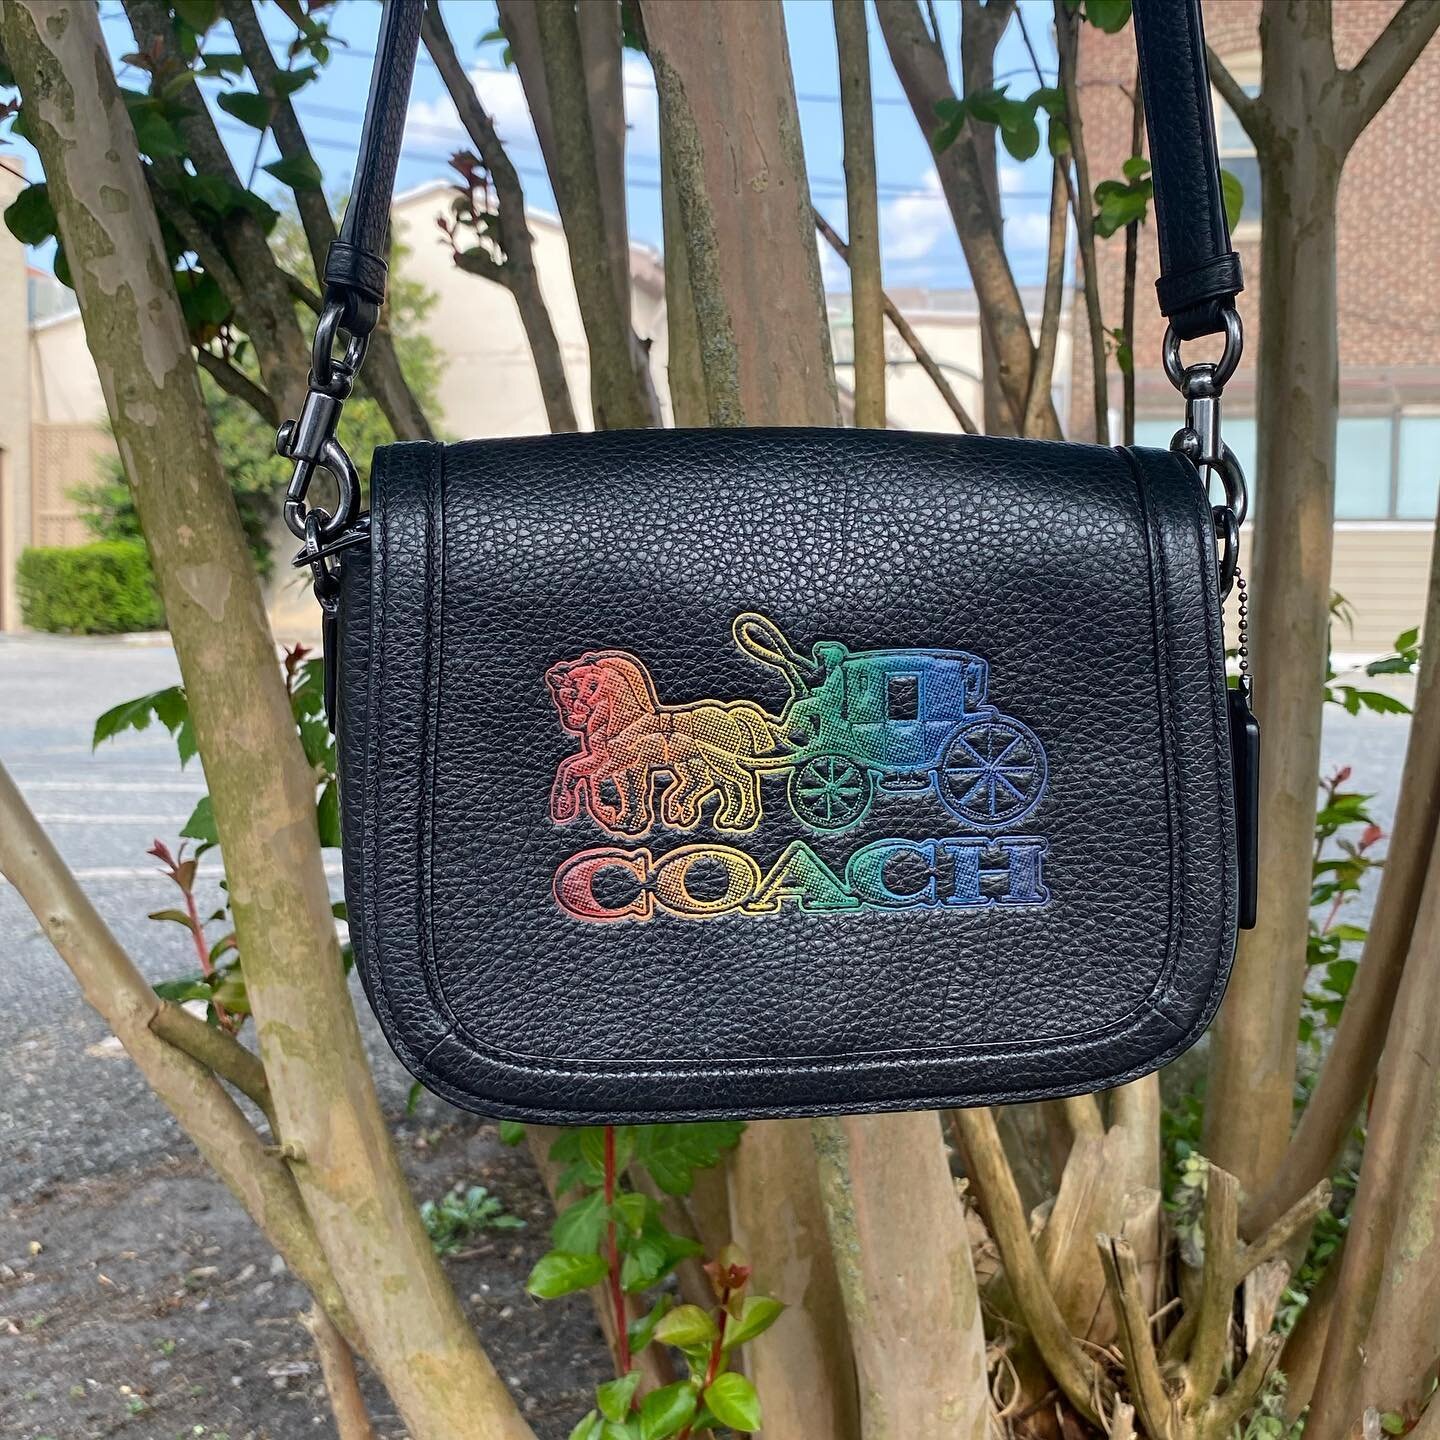 New spin on a classic!! Check out the beauty and many more @greenestreetchestnuthill 
For more information please contact 267.331.6725
#shopsmall #shopgreenestreet #greenestreetchestnuthill #shoplocal #shop #consign #trade #summerbags